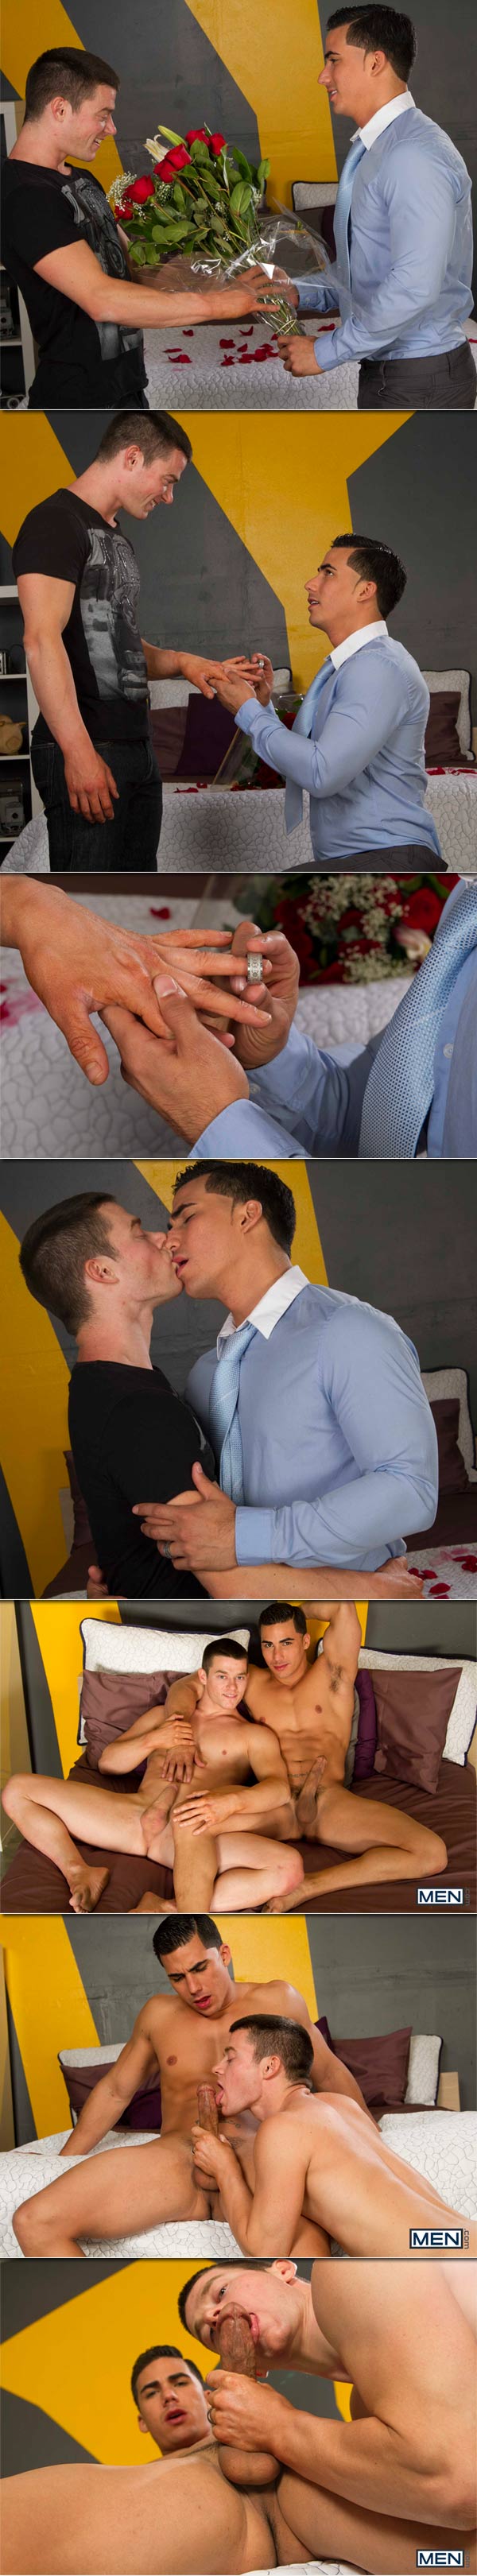 Topher&Chip3